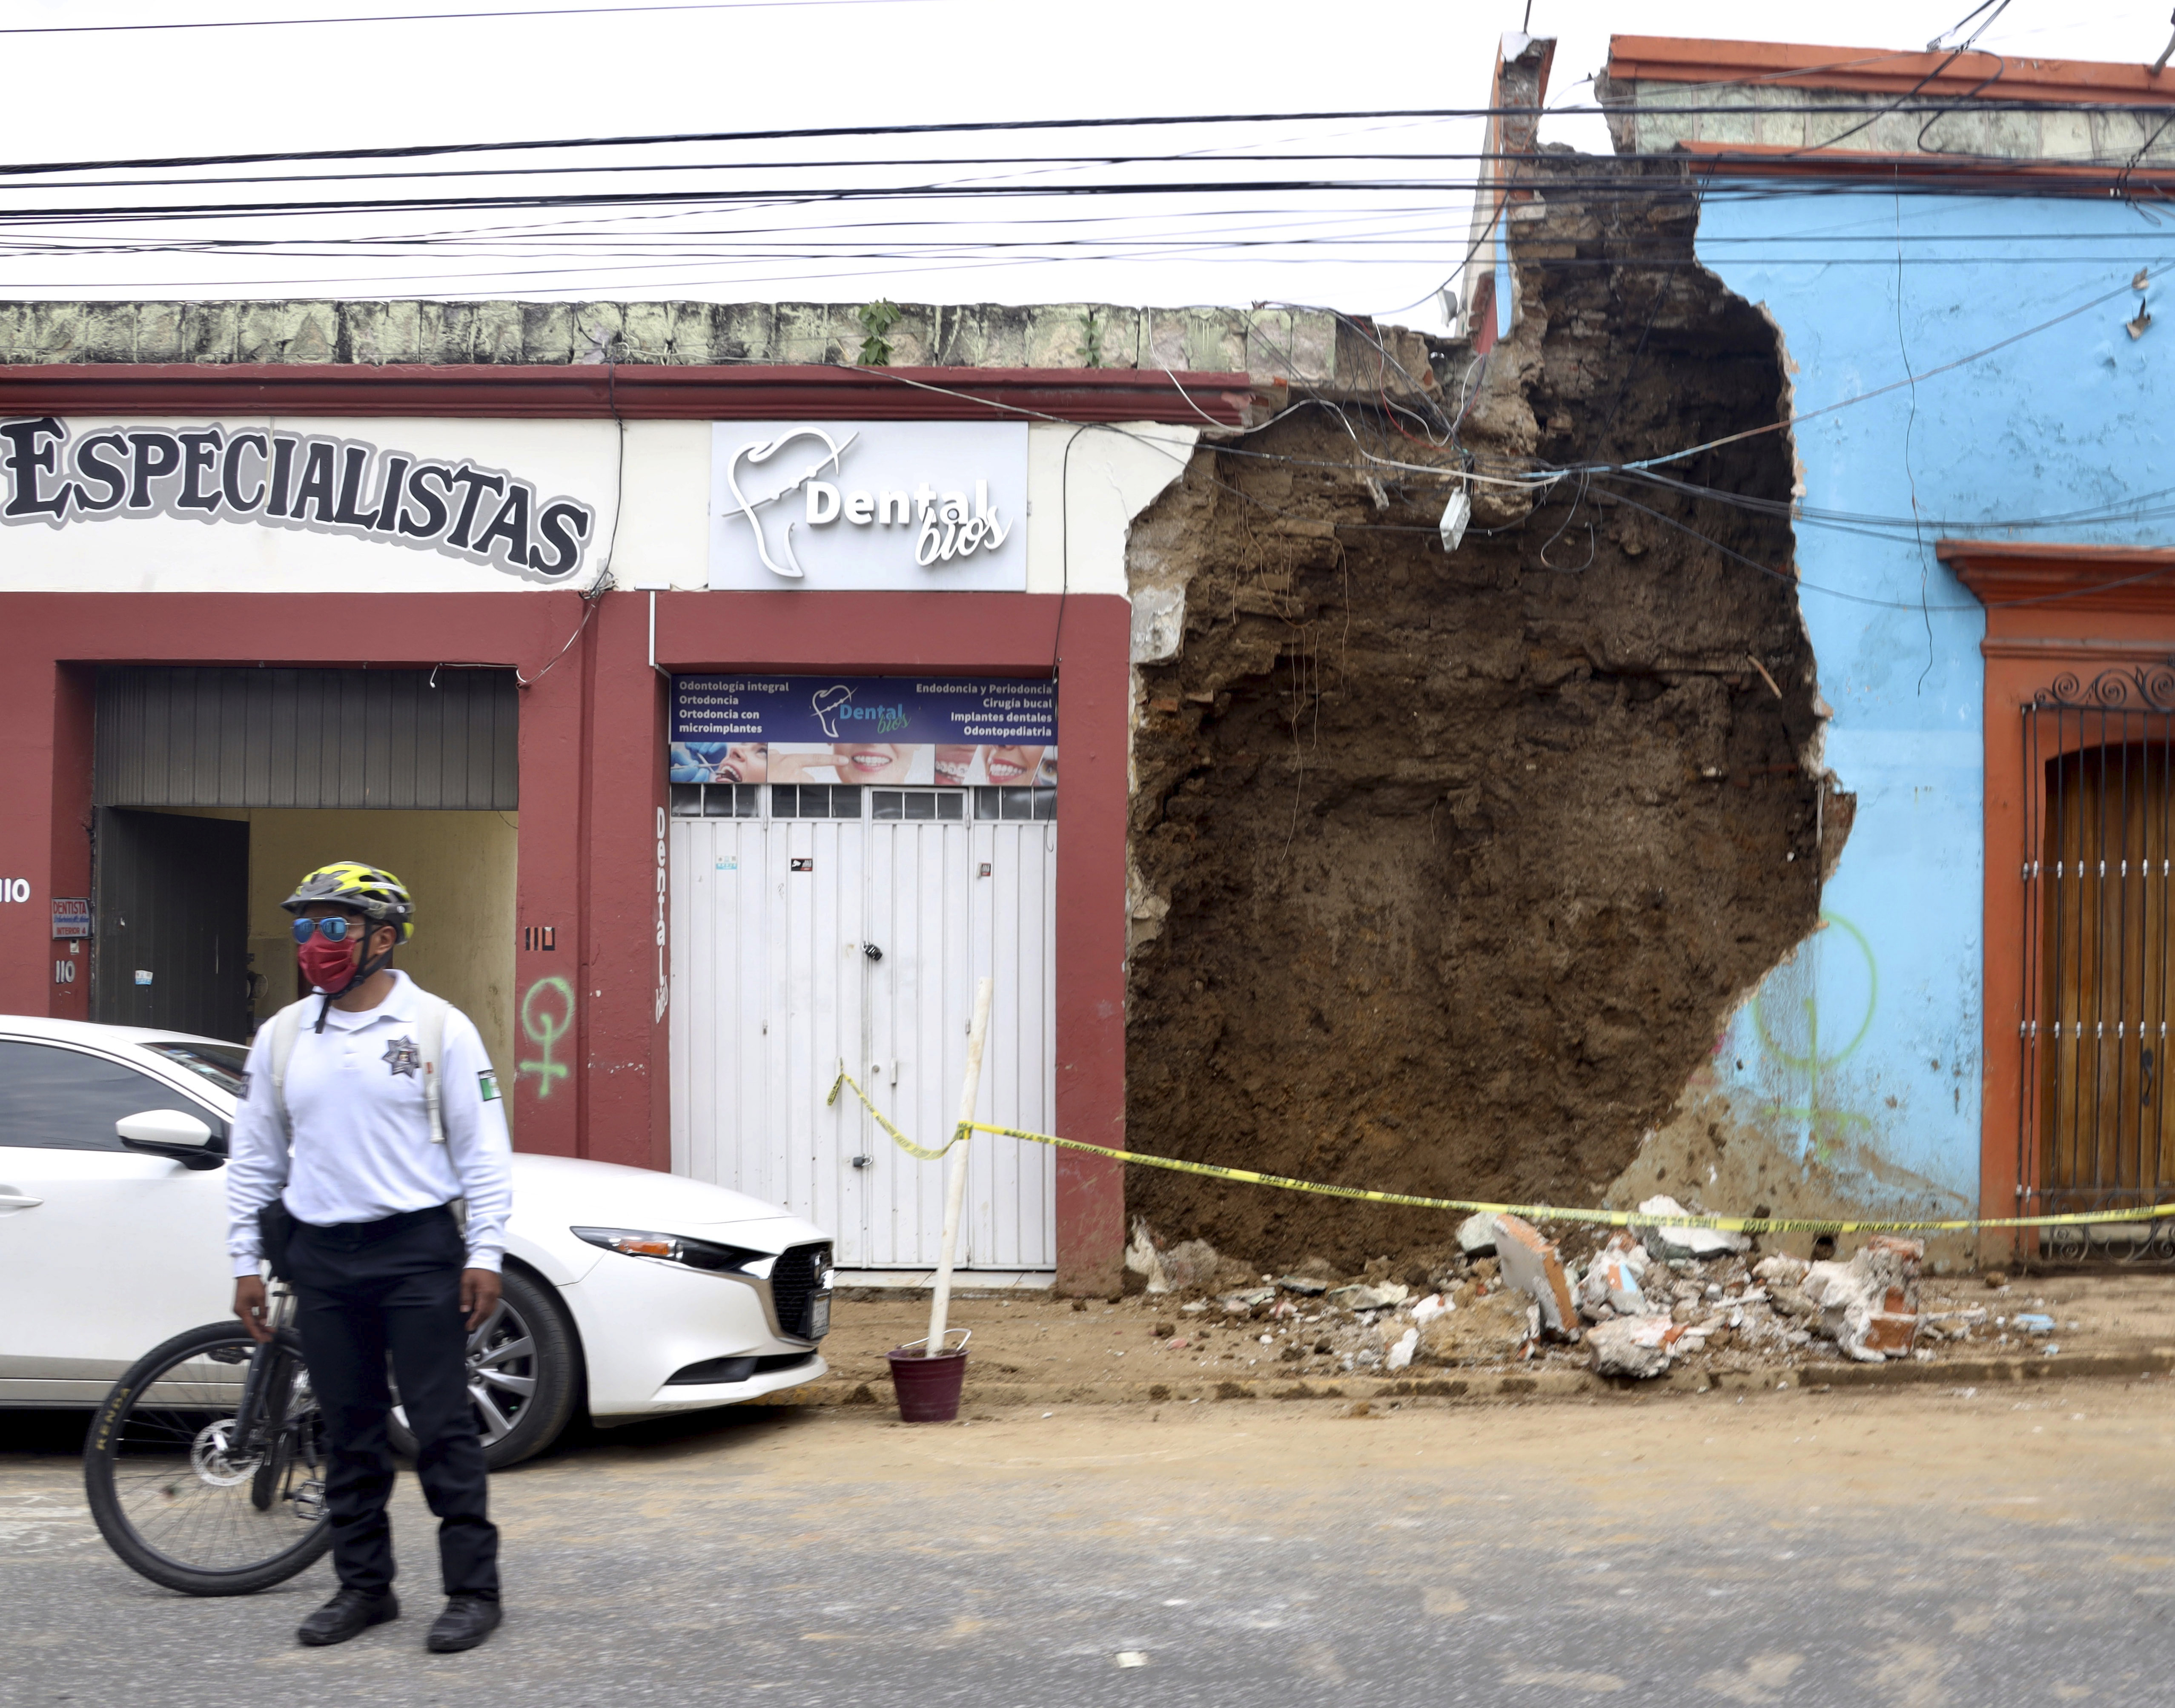 A policeman stands in front of a partially collapsed building after an earthquake in Oaxaca,, Mexico, Tuesday, June 23, 2020. The earthquake was centered near the resort of Huatulco, in the southern state of Oaxaca. (AP Photo/Luis Alberto Cruz Hernandez)